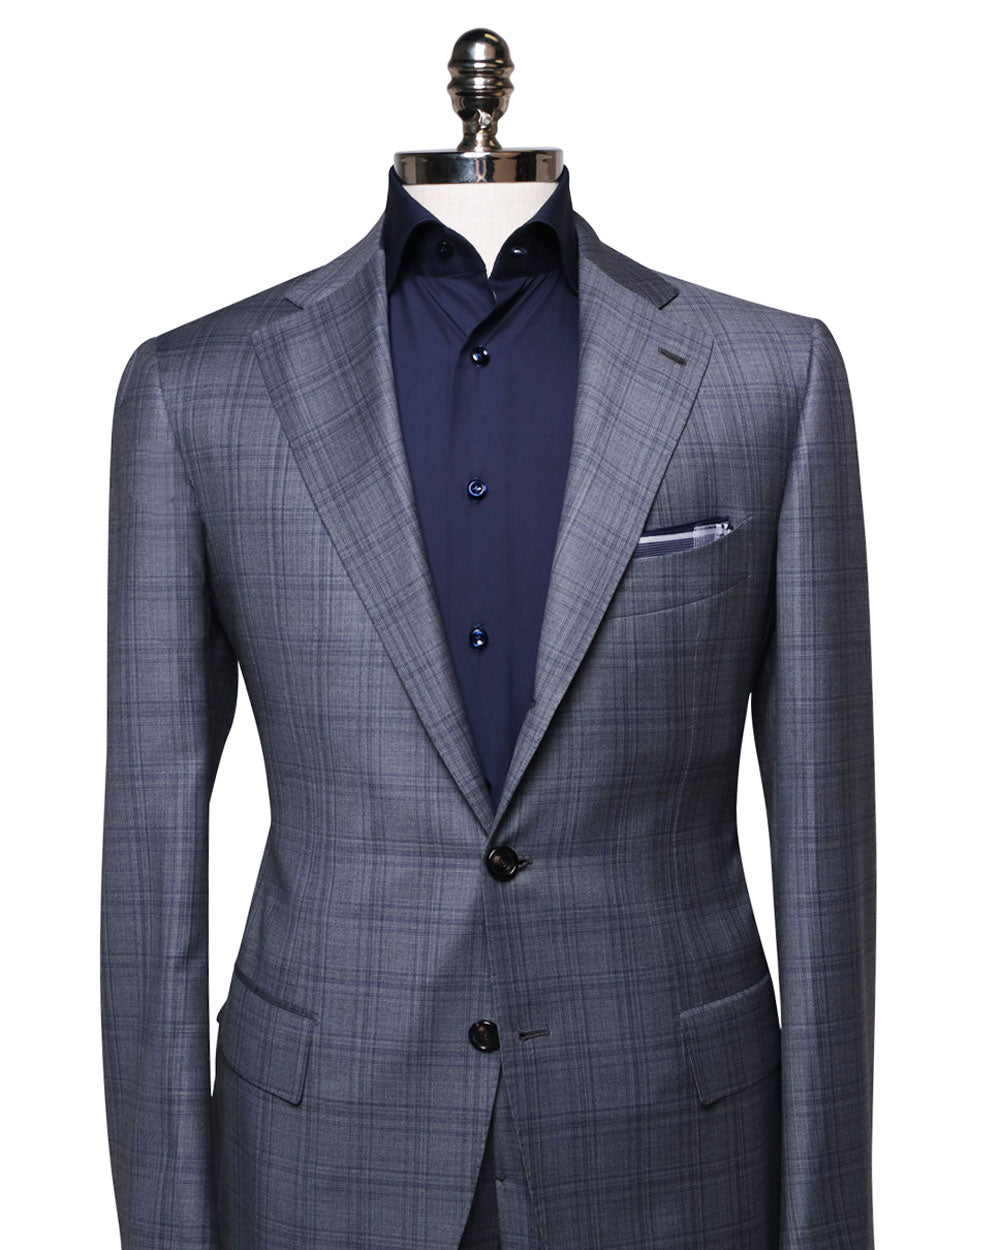 Navy and Grey Plaid Suit